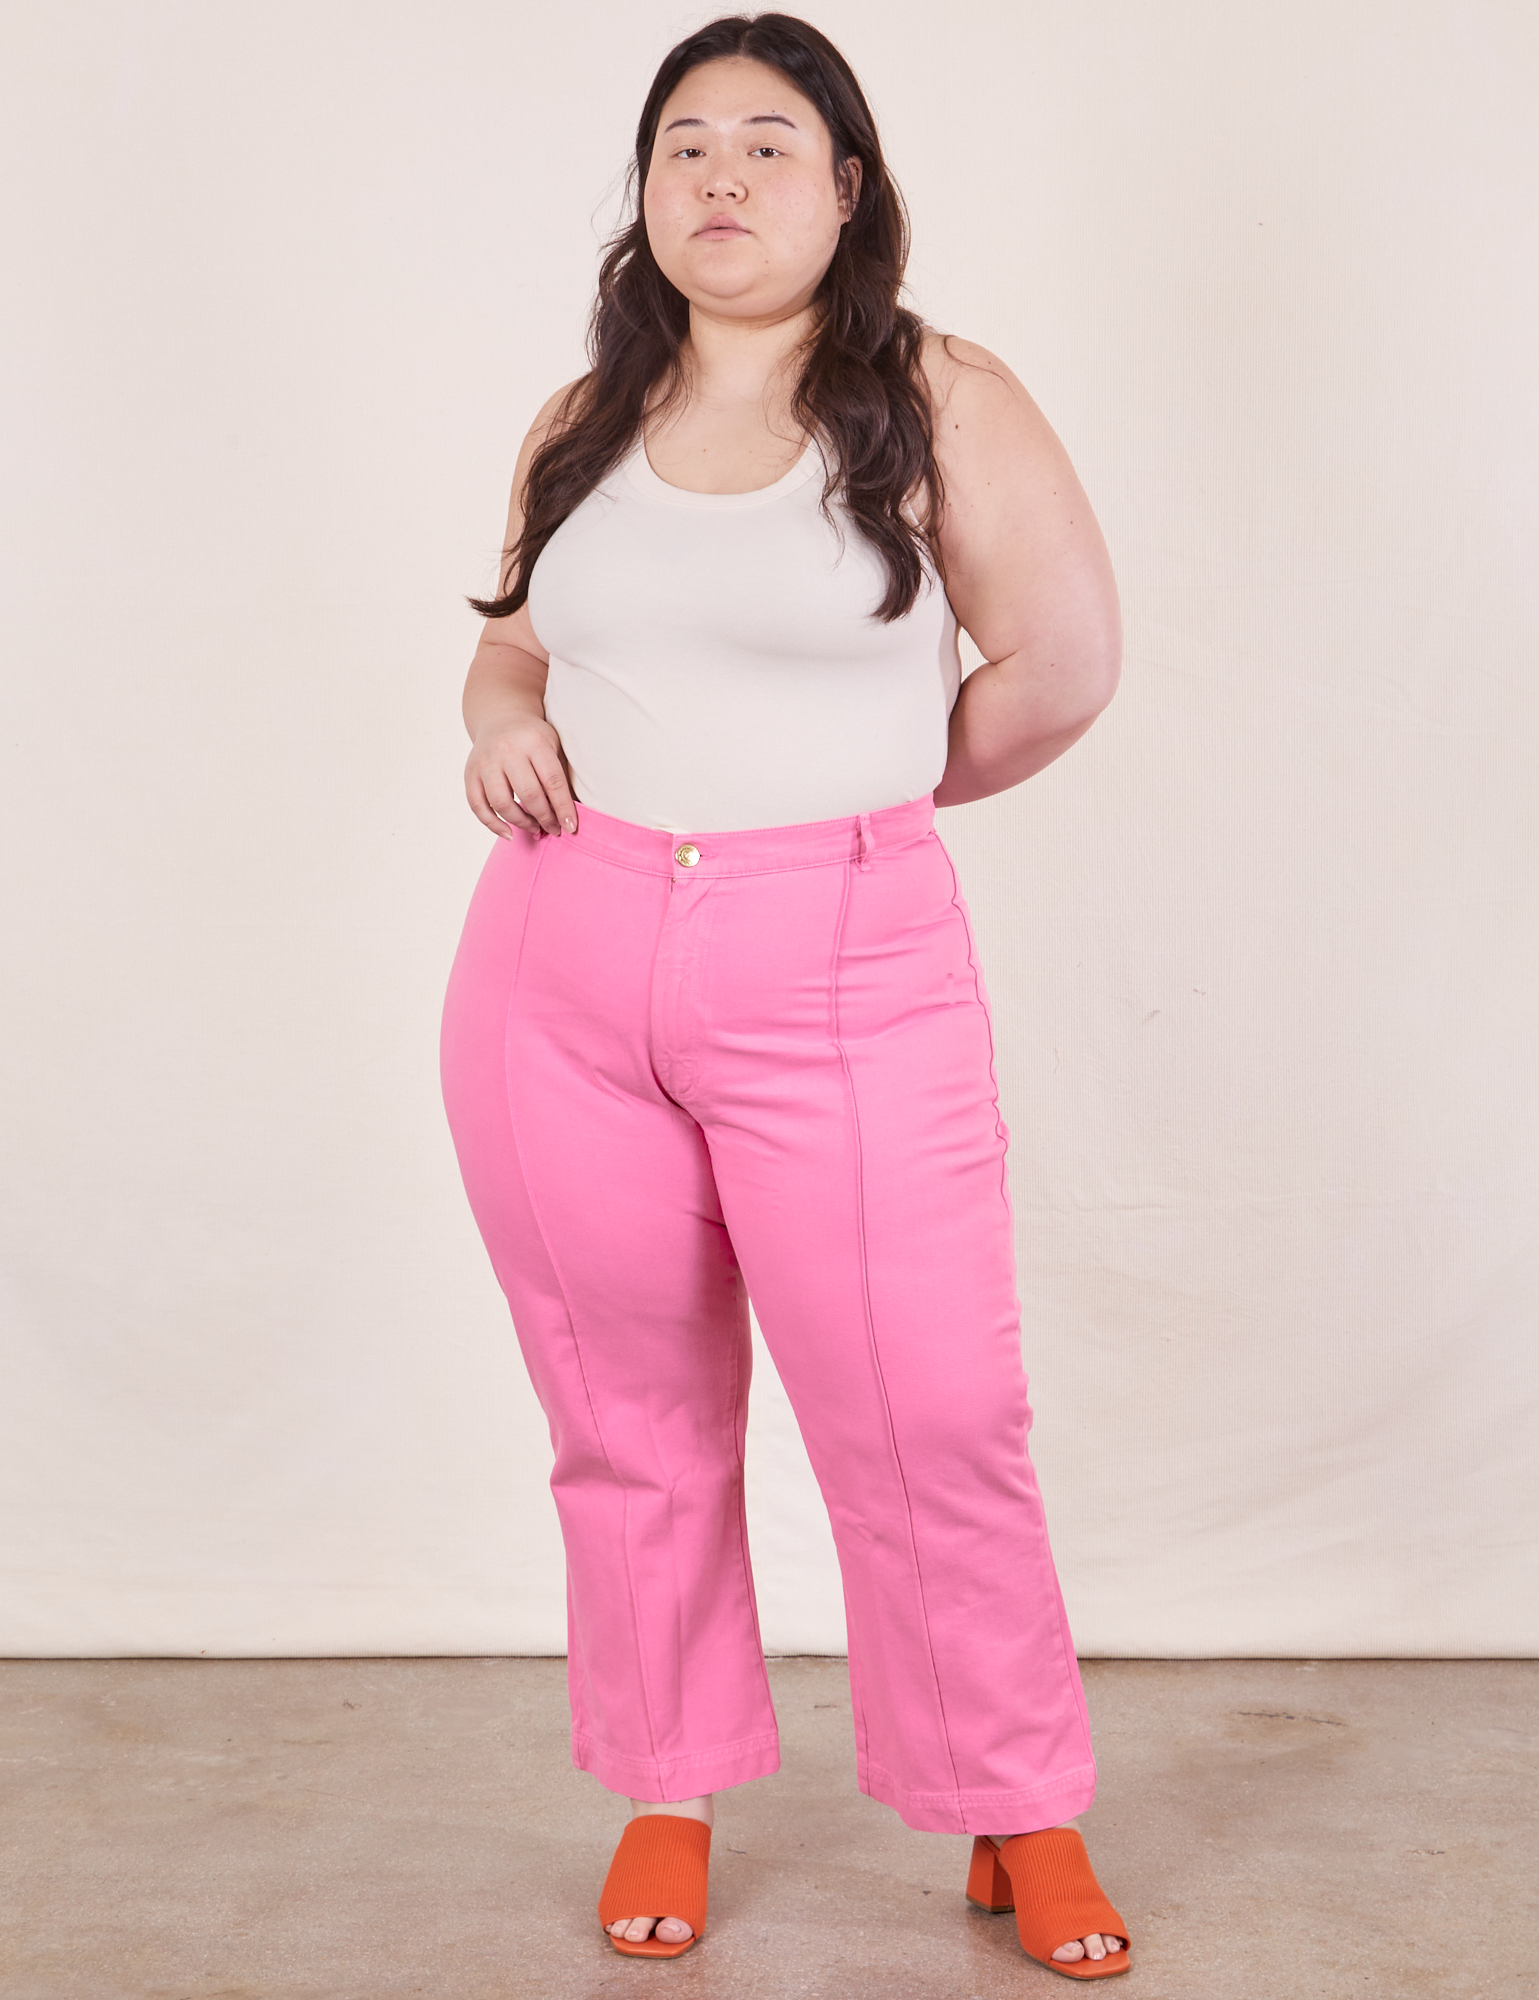 Ashley is 5&#39;7&quot; and wearing size 1XL Western Pants in Bubblegum Pink paired with vintage off-white Tank Top